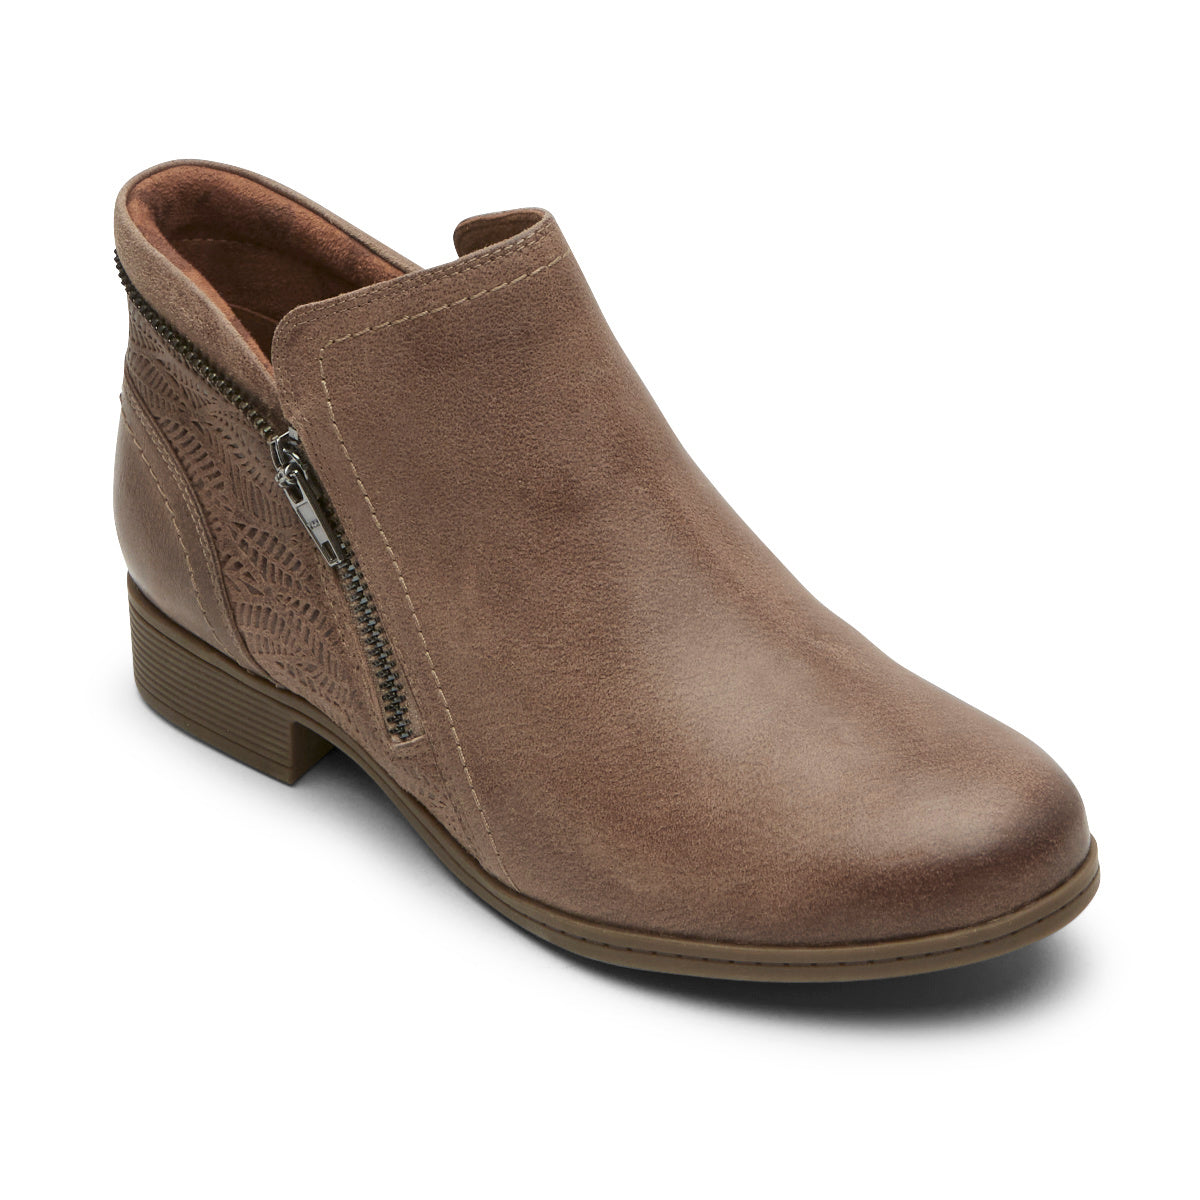 Women's Cobb Hill Crosbie Bootie Color: Taupe